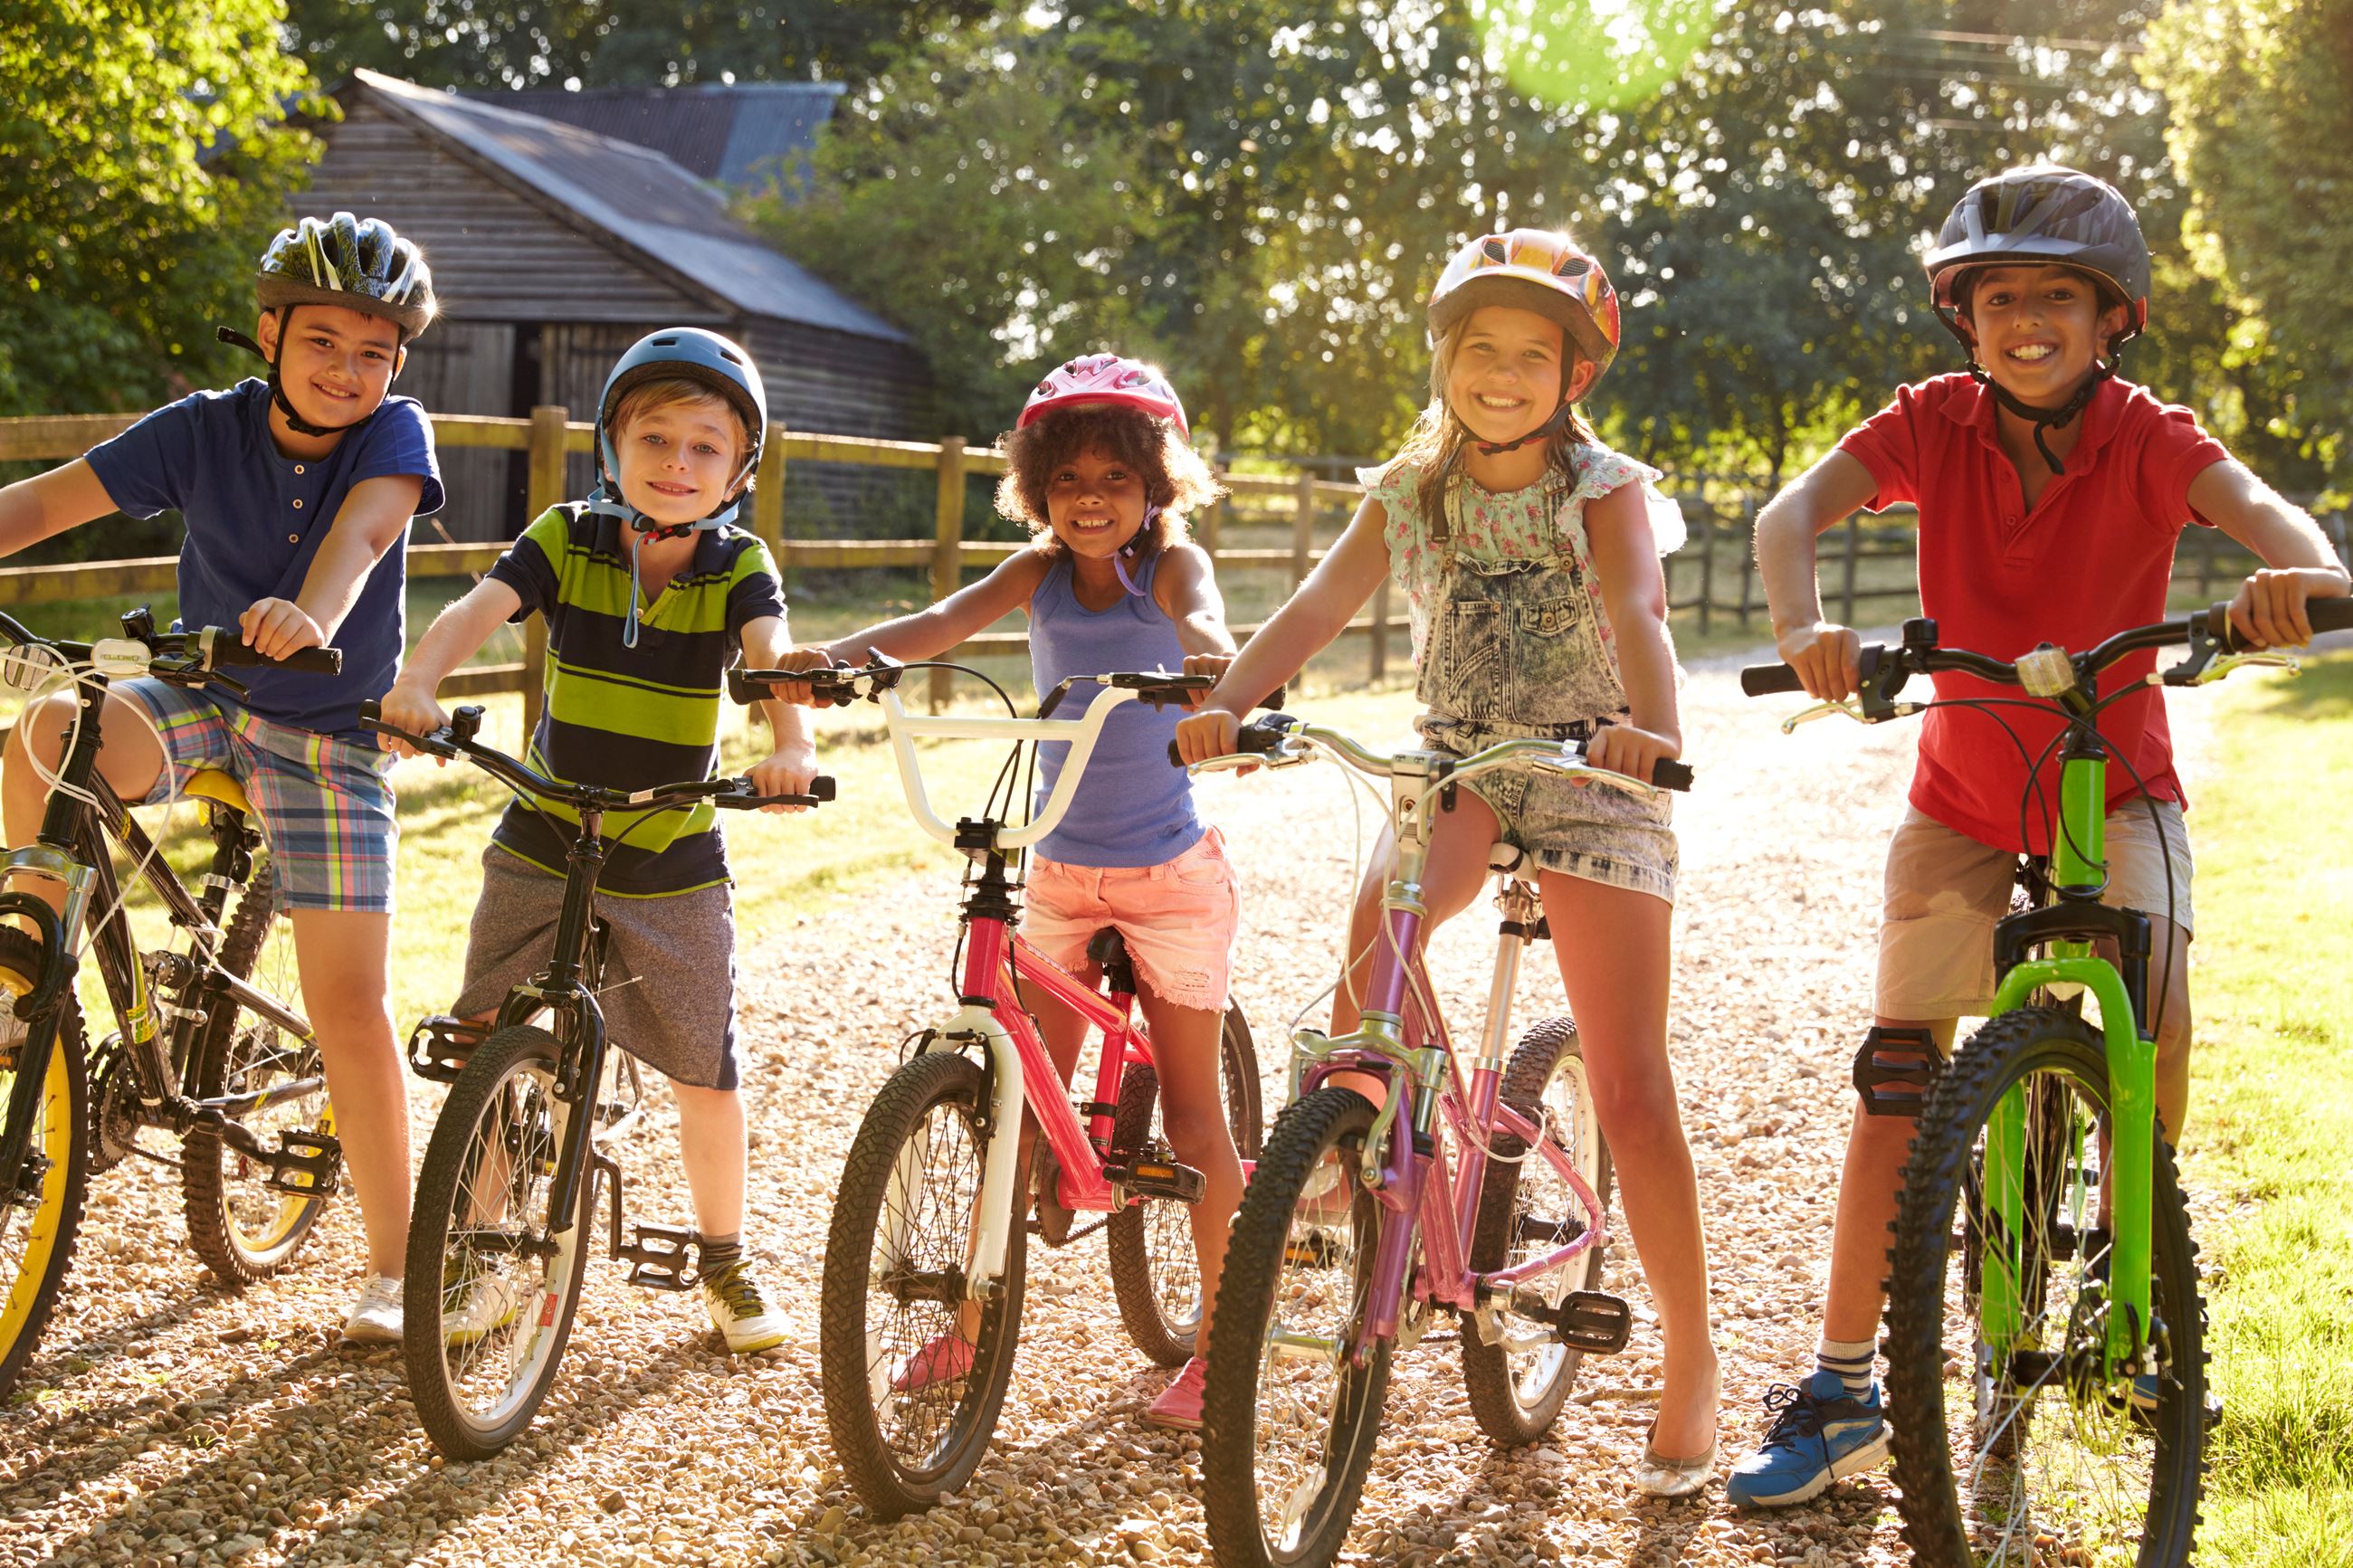 Group of children riding bikes and wearing protective gear.